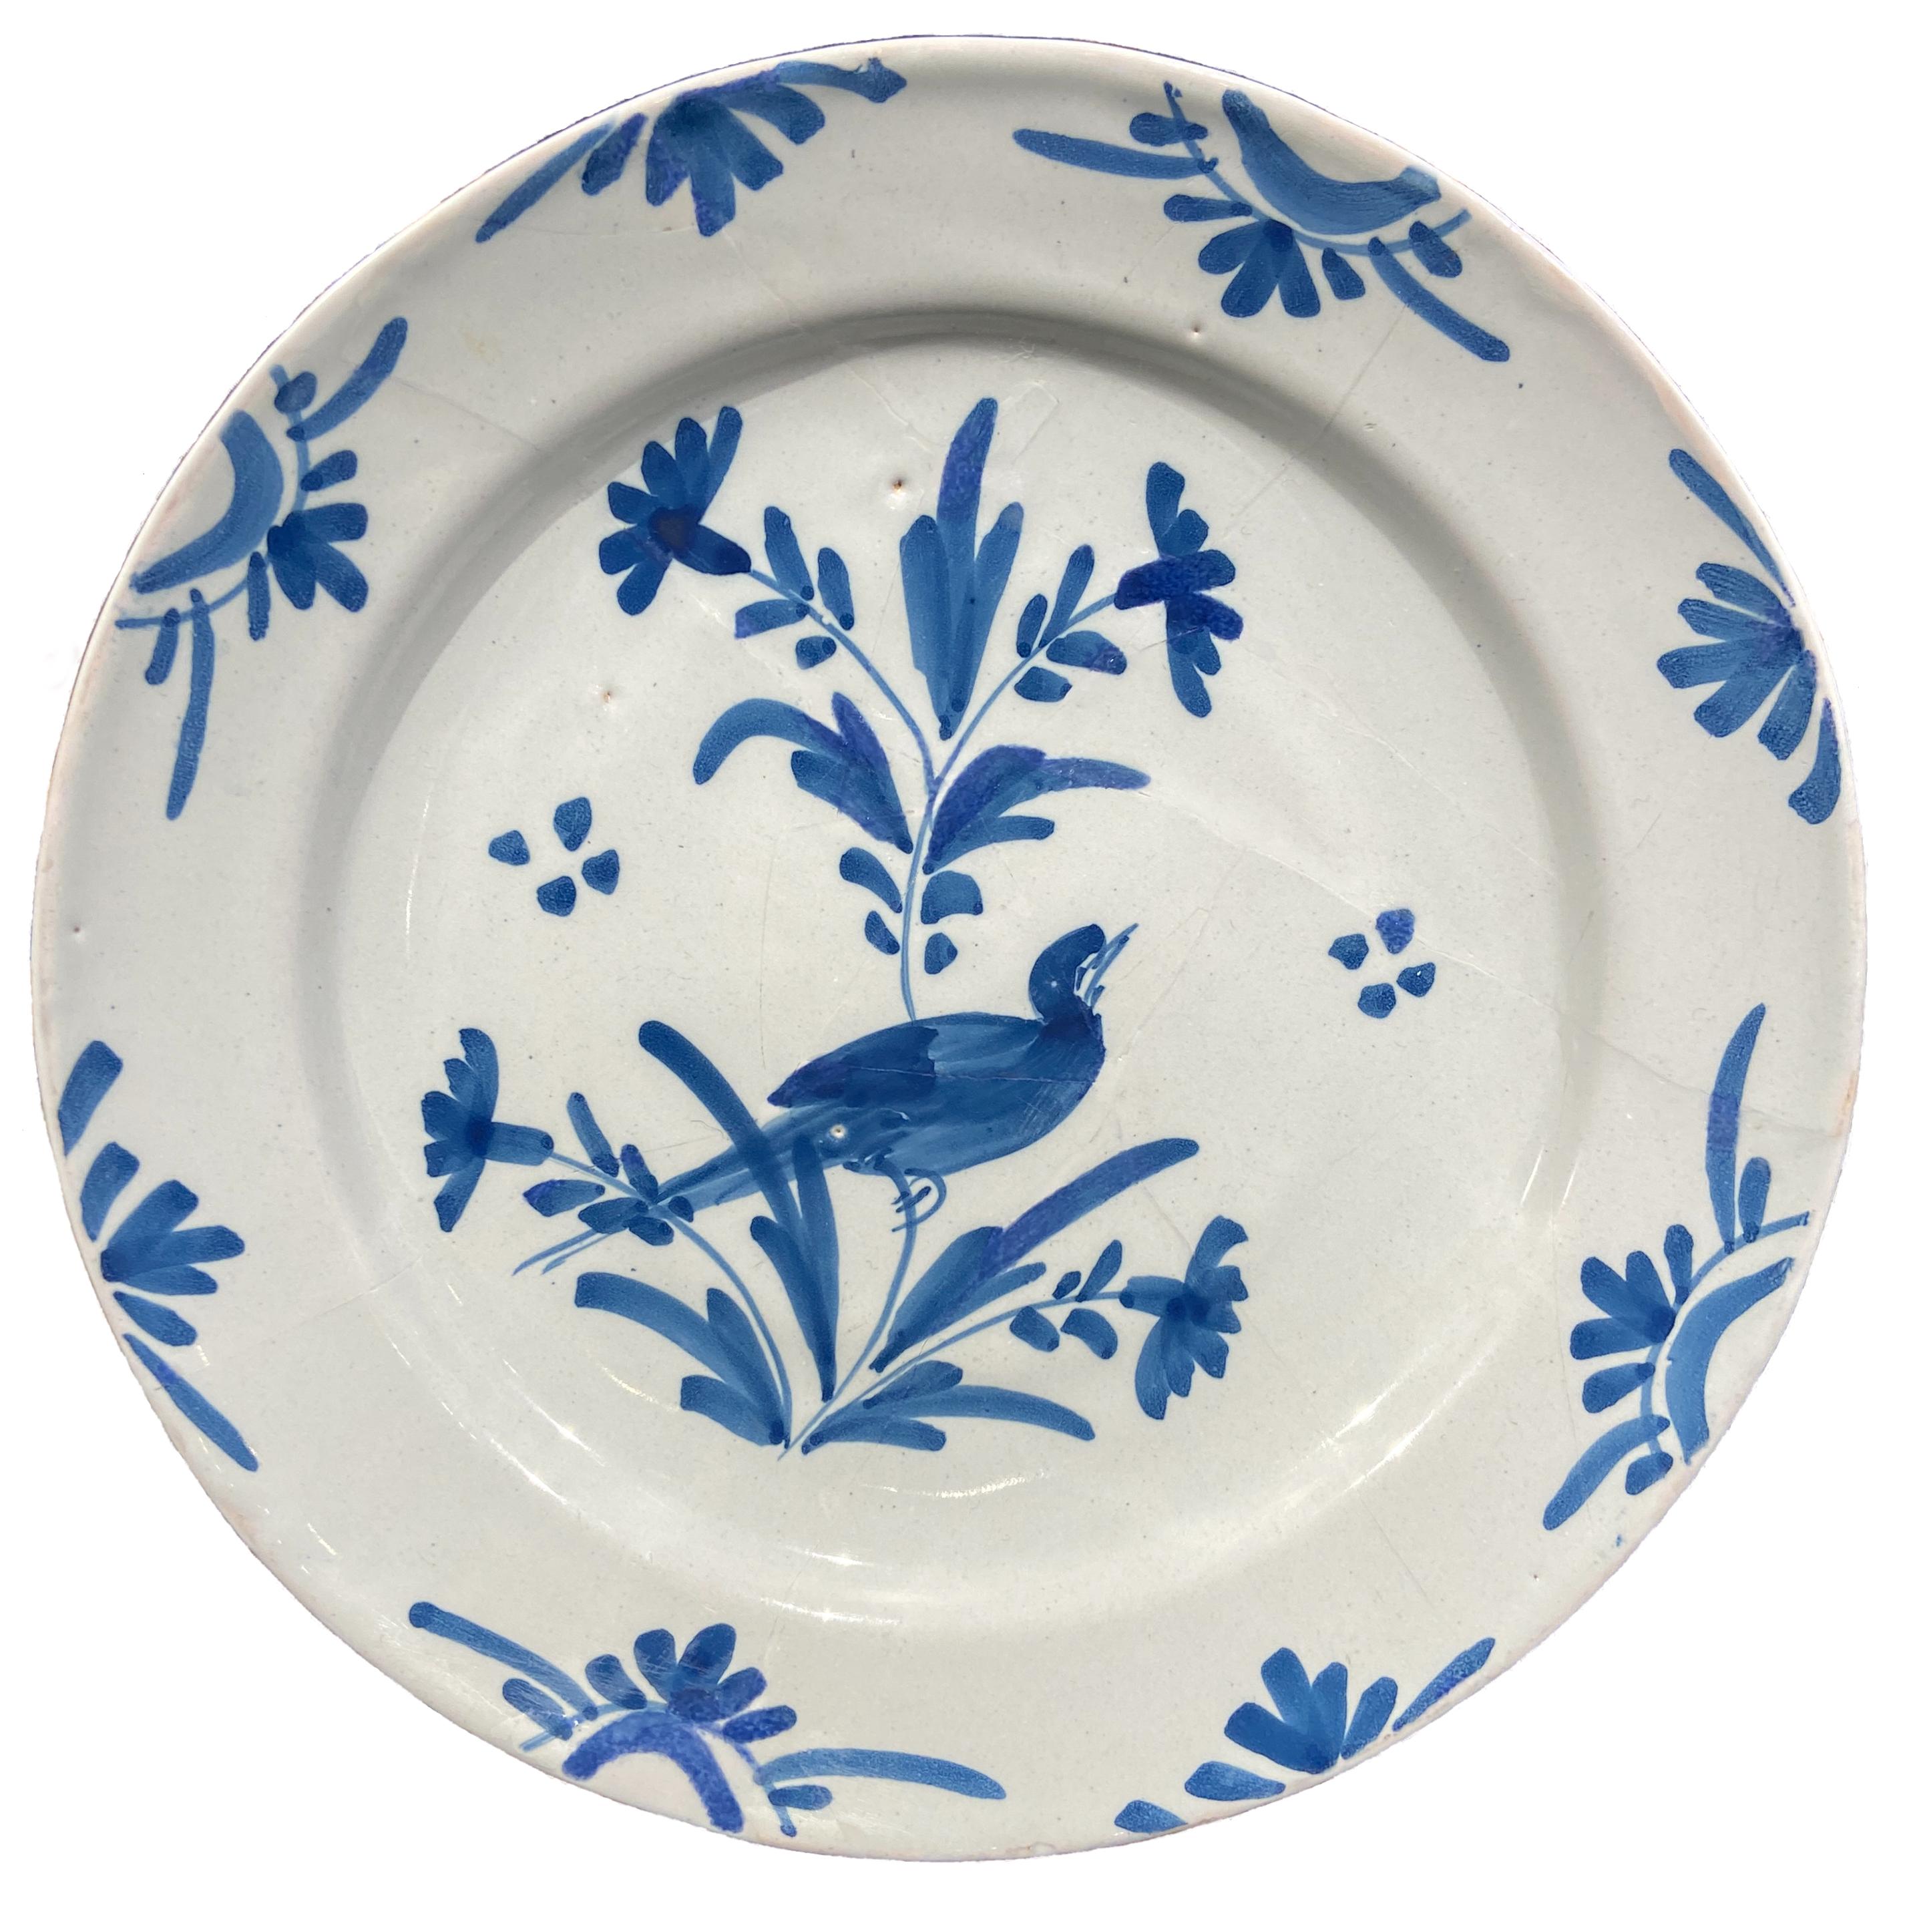 Lambeth Plate, English Delftware, Blue and White Design c. 1750 - Sculpture by 18th Century English School